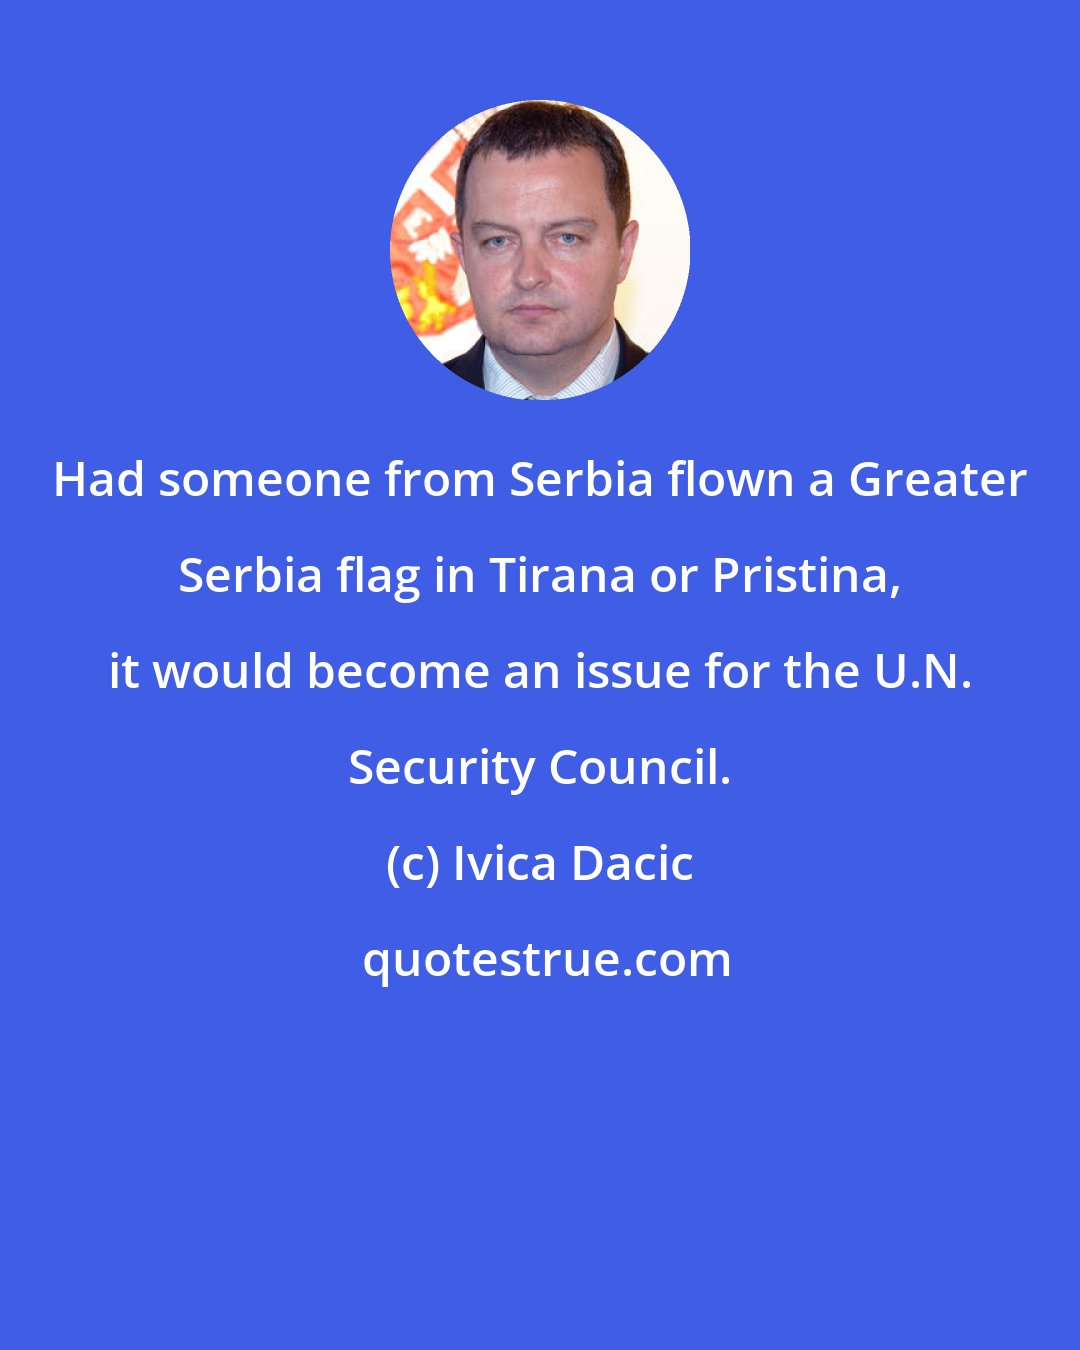 Ivica Dacic: Had someone from Serbia flown a Greater Serbia flag in Tirana or Pristina, it would become an issue for the U.N. Security Council.